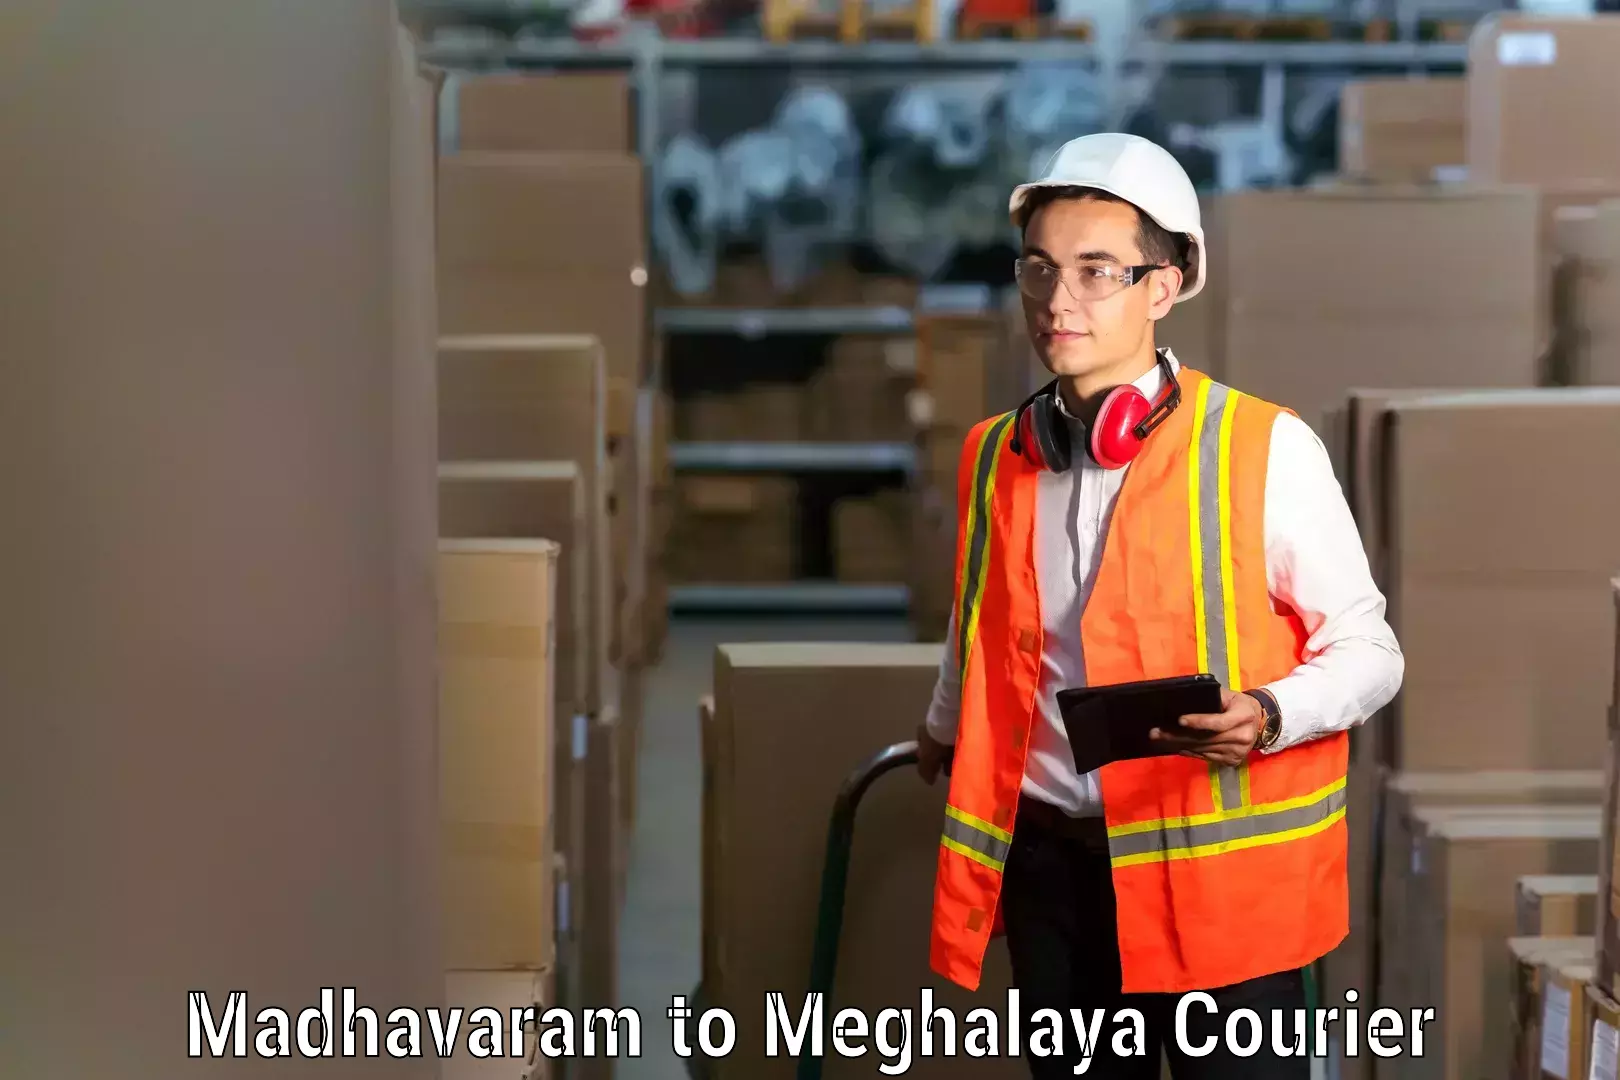 Reliable relocation services Madhavaram to Shillong